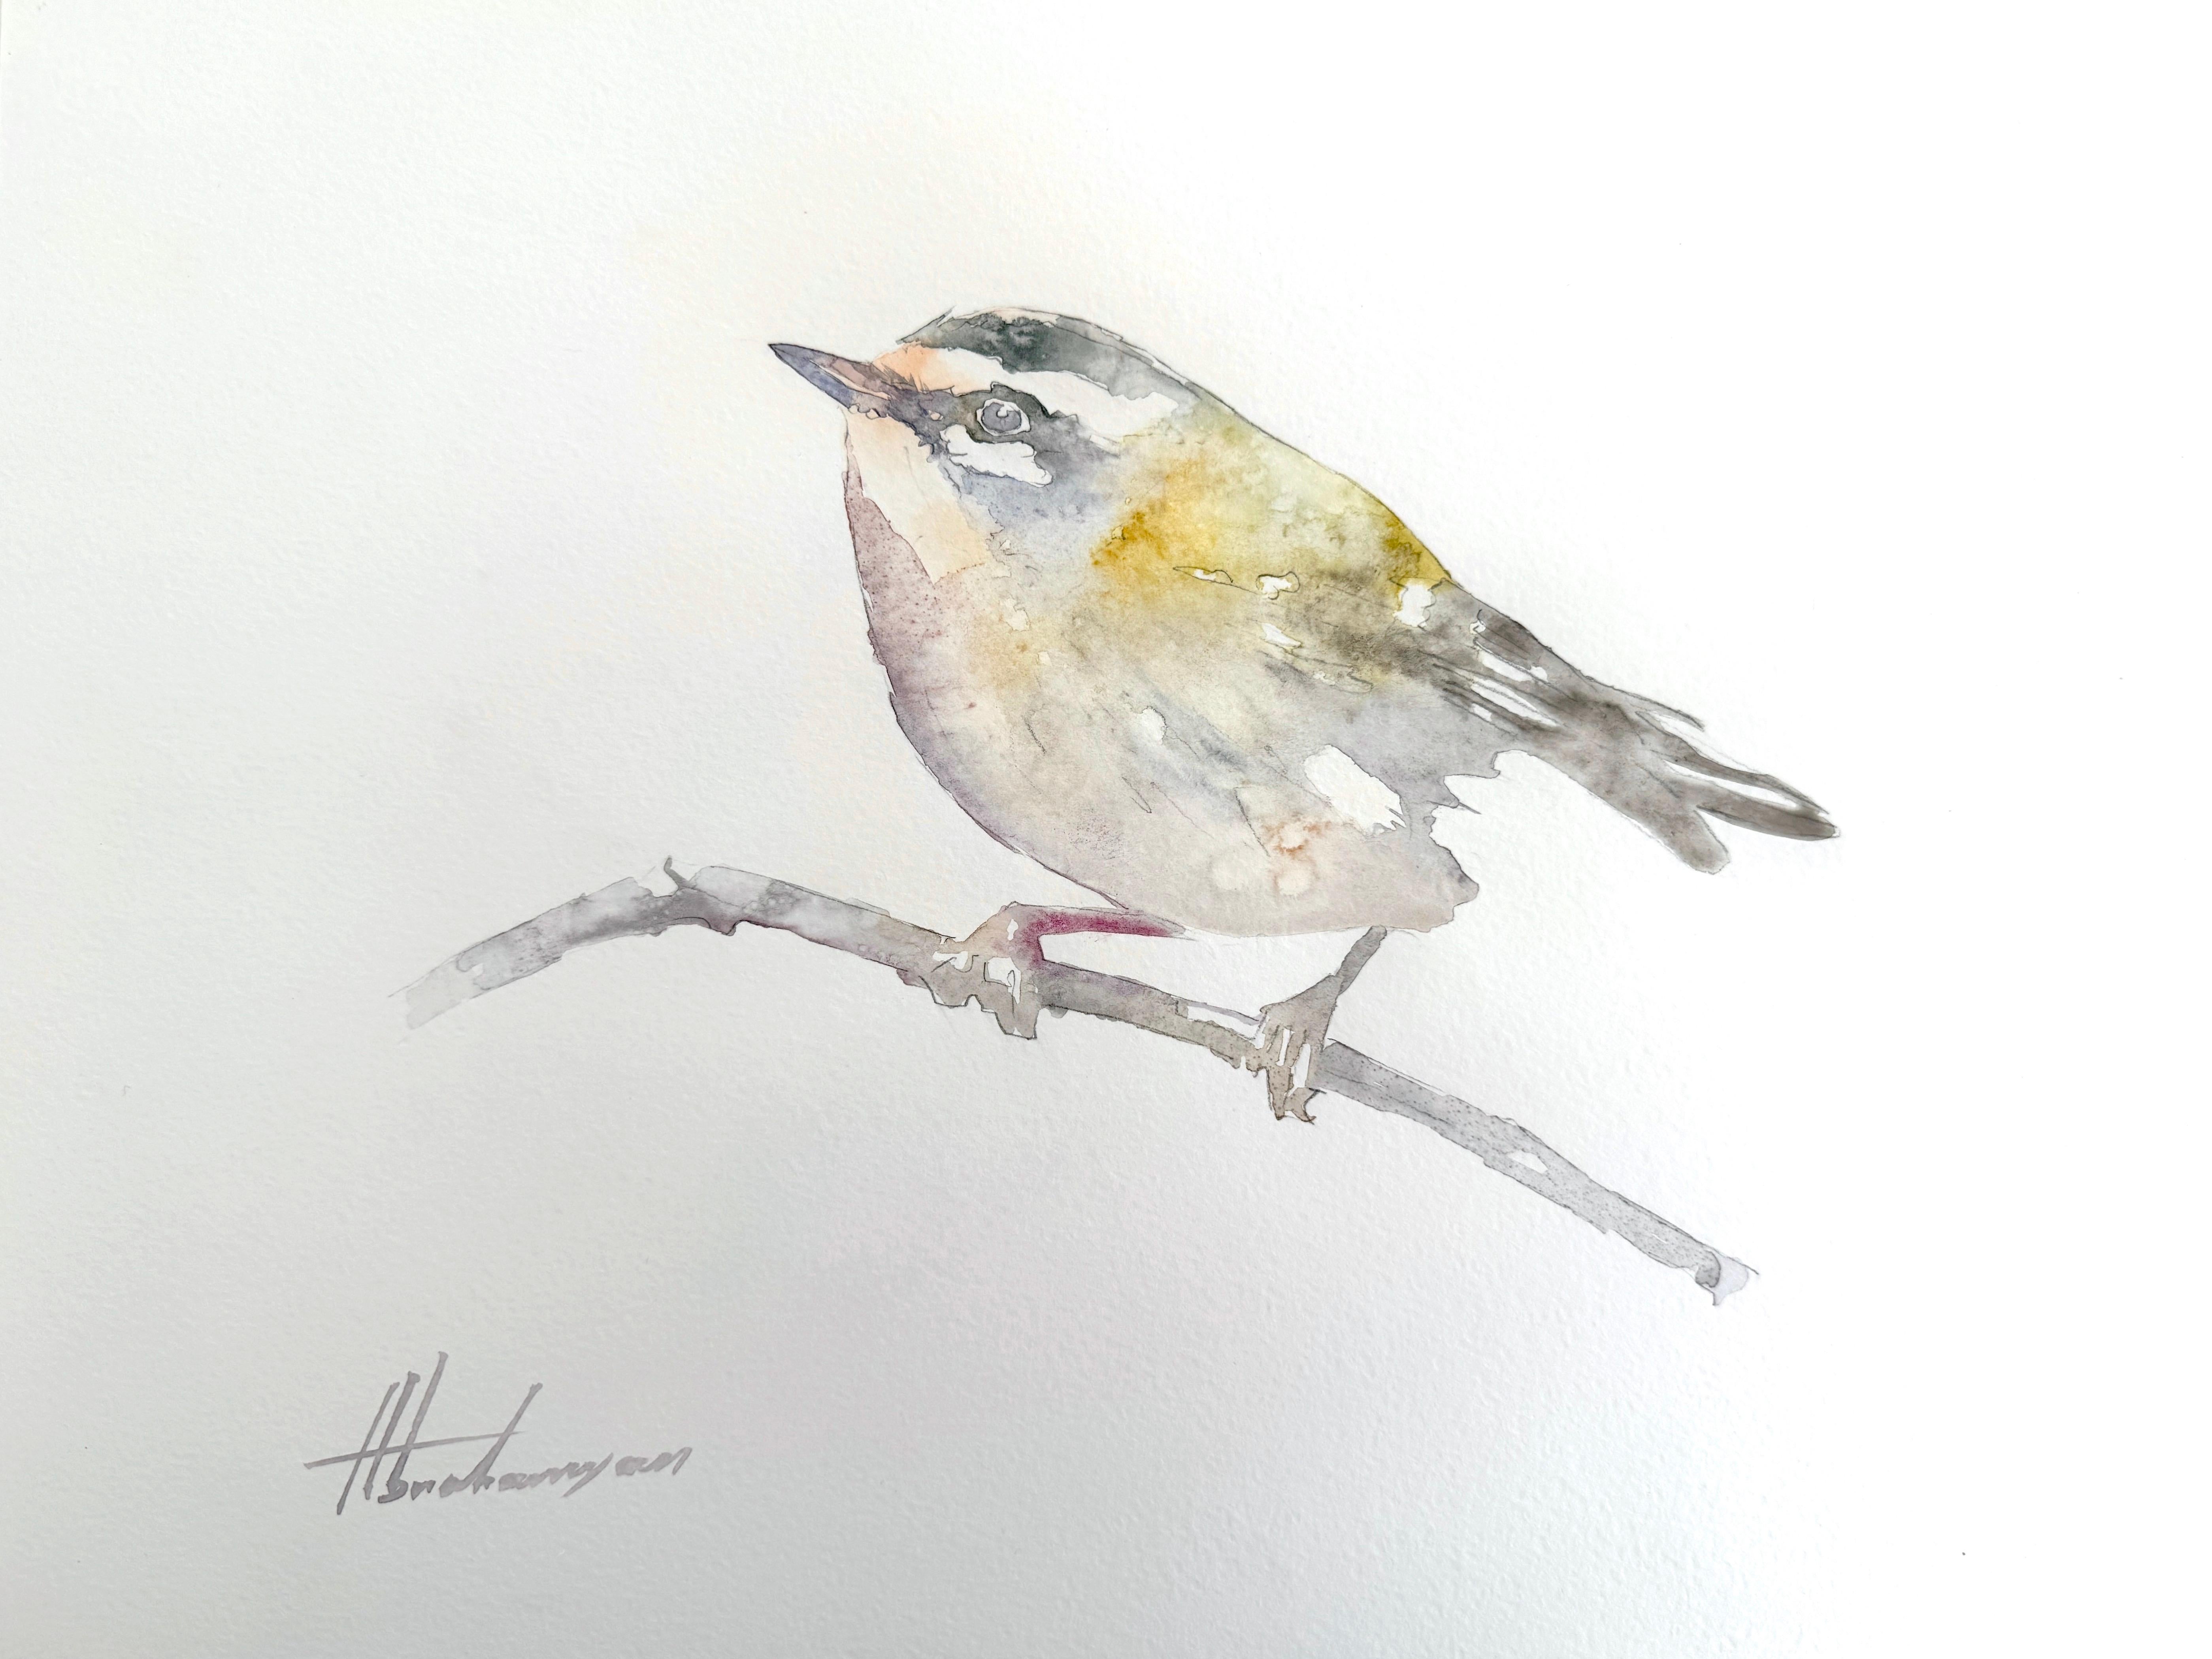 Warbler, Bird, Watercolor Handmade Painting, One of a Kind